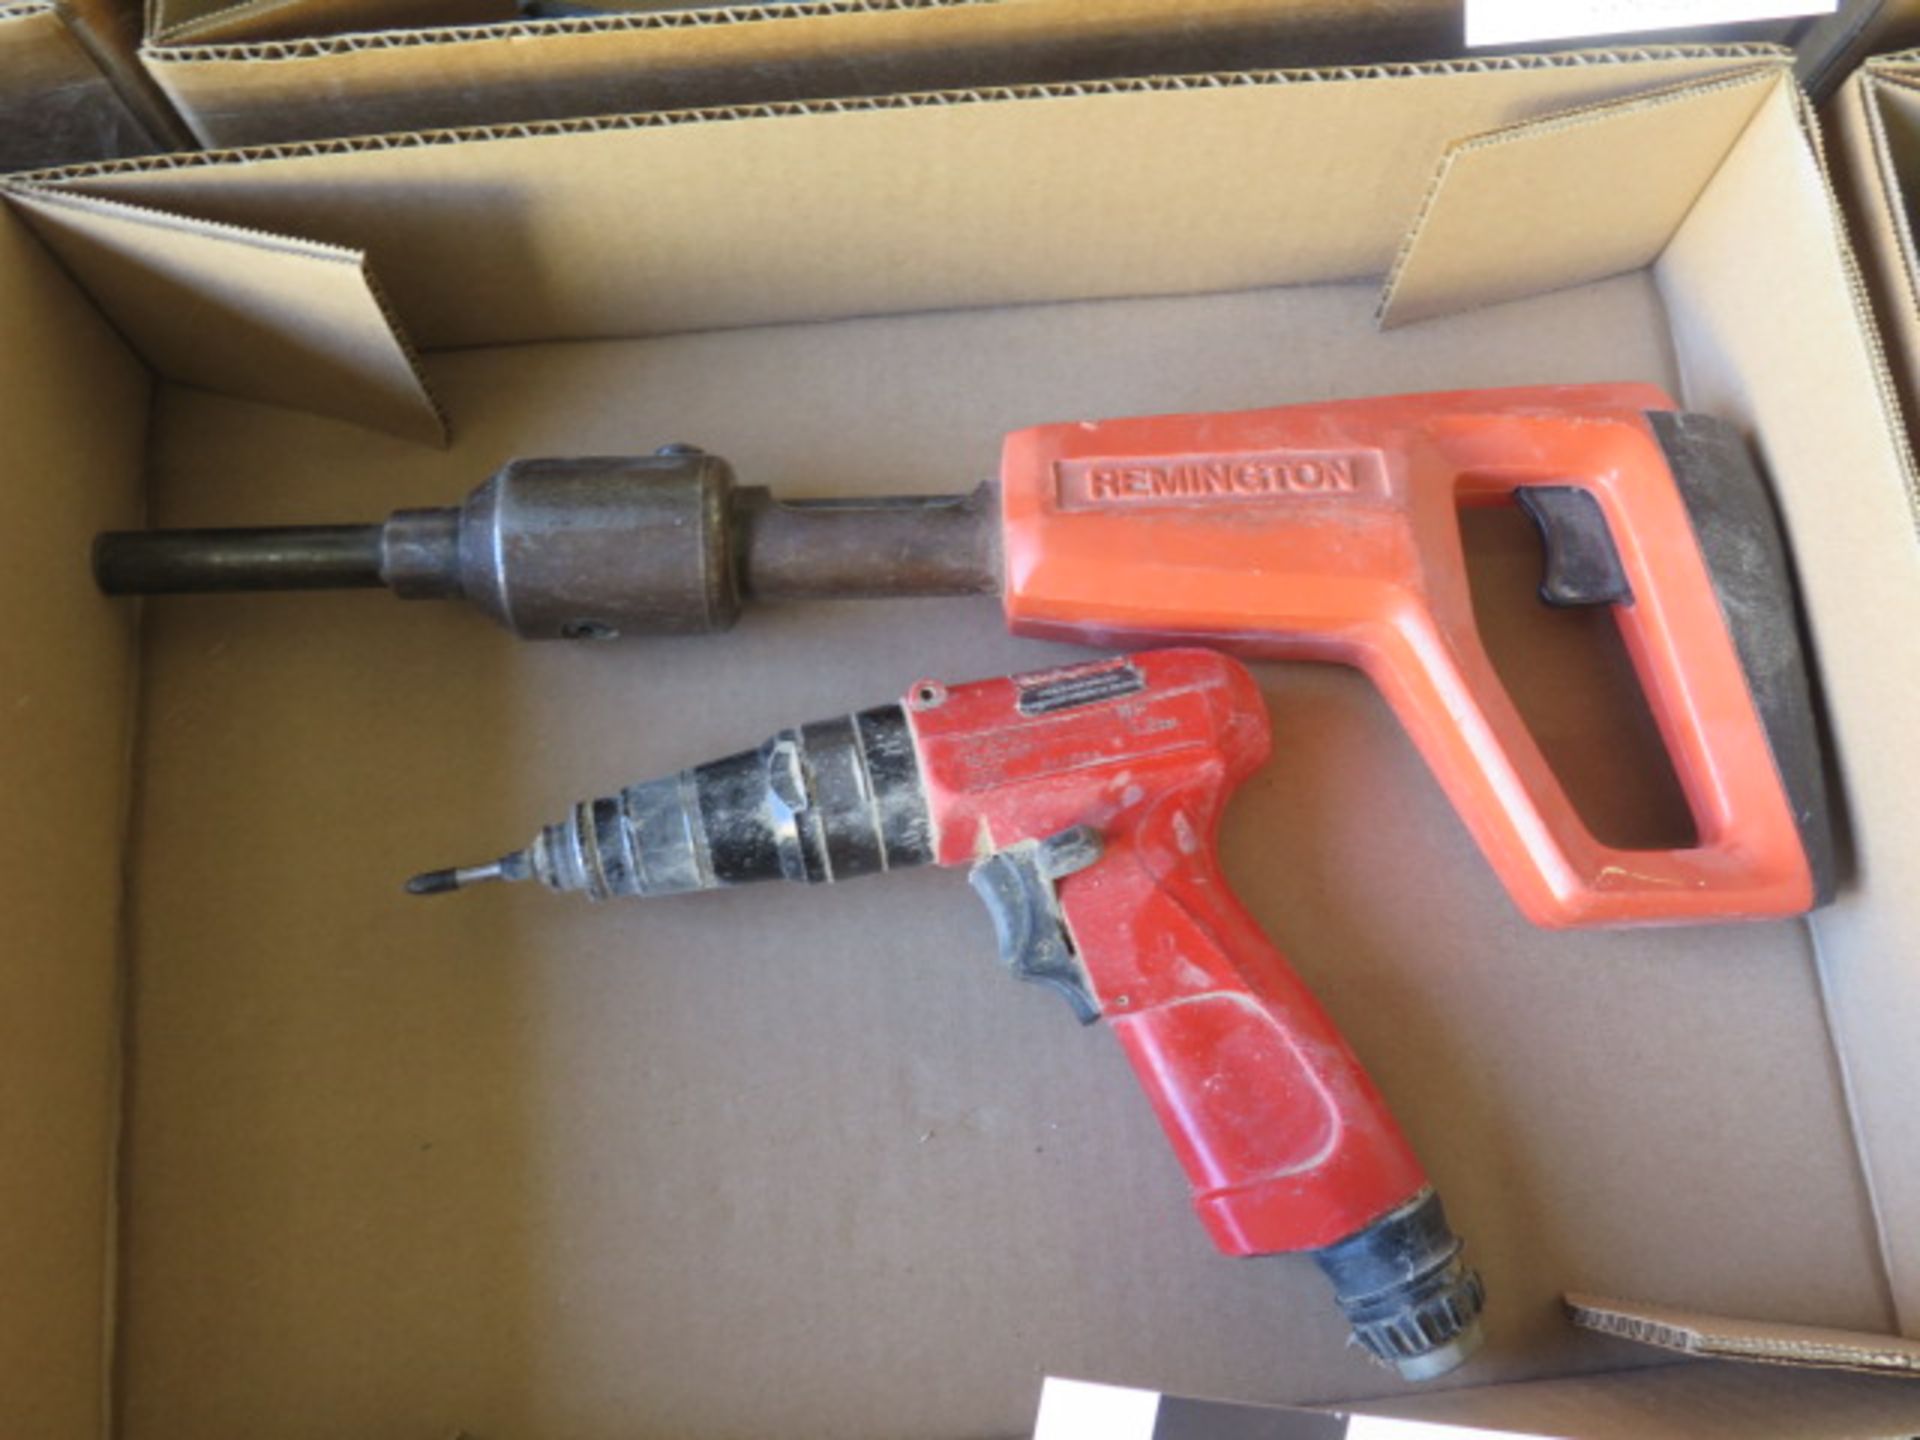 Remington Powder Shot Tool and Chicago Pneumatic Nut Driver (SOLD AS-IS - NO WARRANTY) - Image 2 of 4